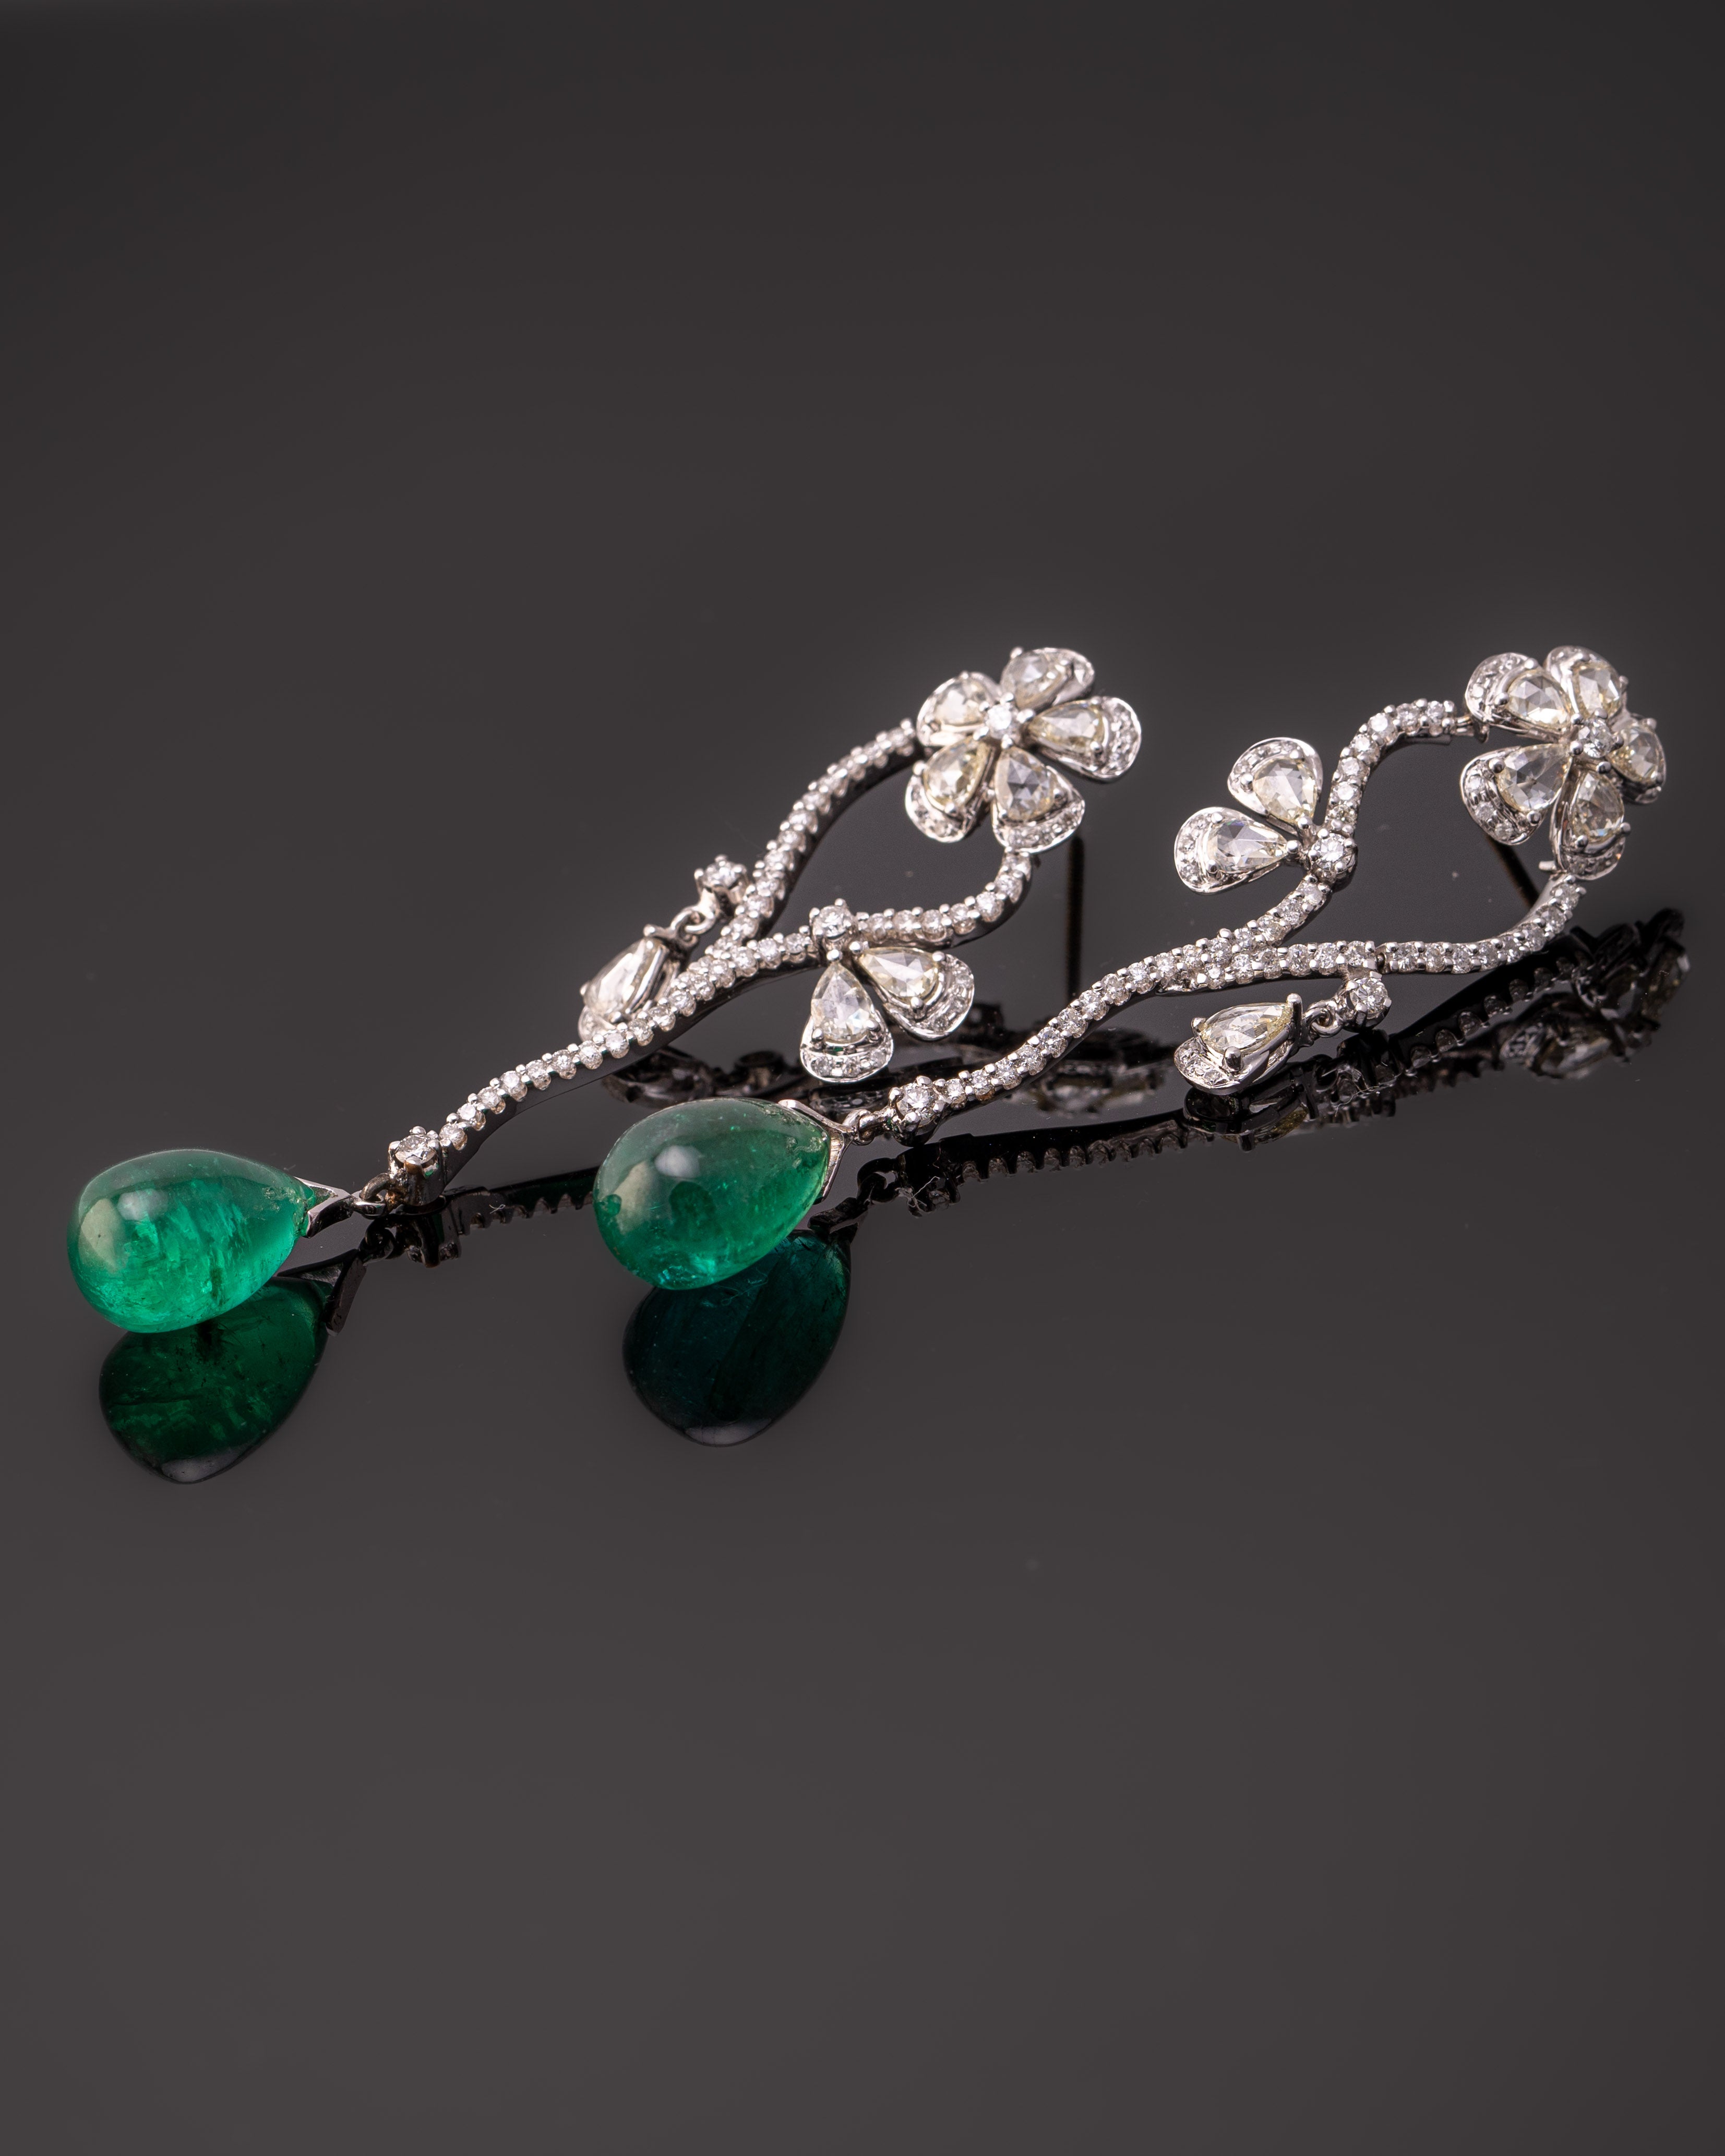 Make a statement with this stunning pair of 20.87 carat natural Zambian Emerald drop earrings, with 2.86 carat rose cut and 1.59 carat brilliant cut White Diamonds. The Emeralds are absolutely transparent, with a great vivid green color and luster.